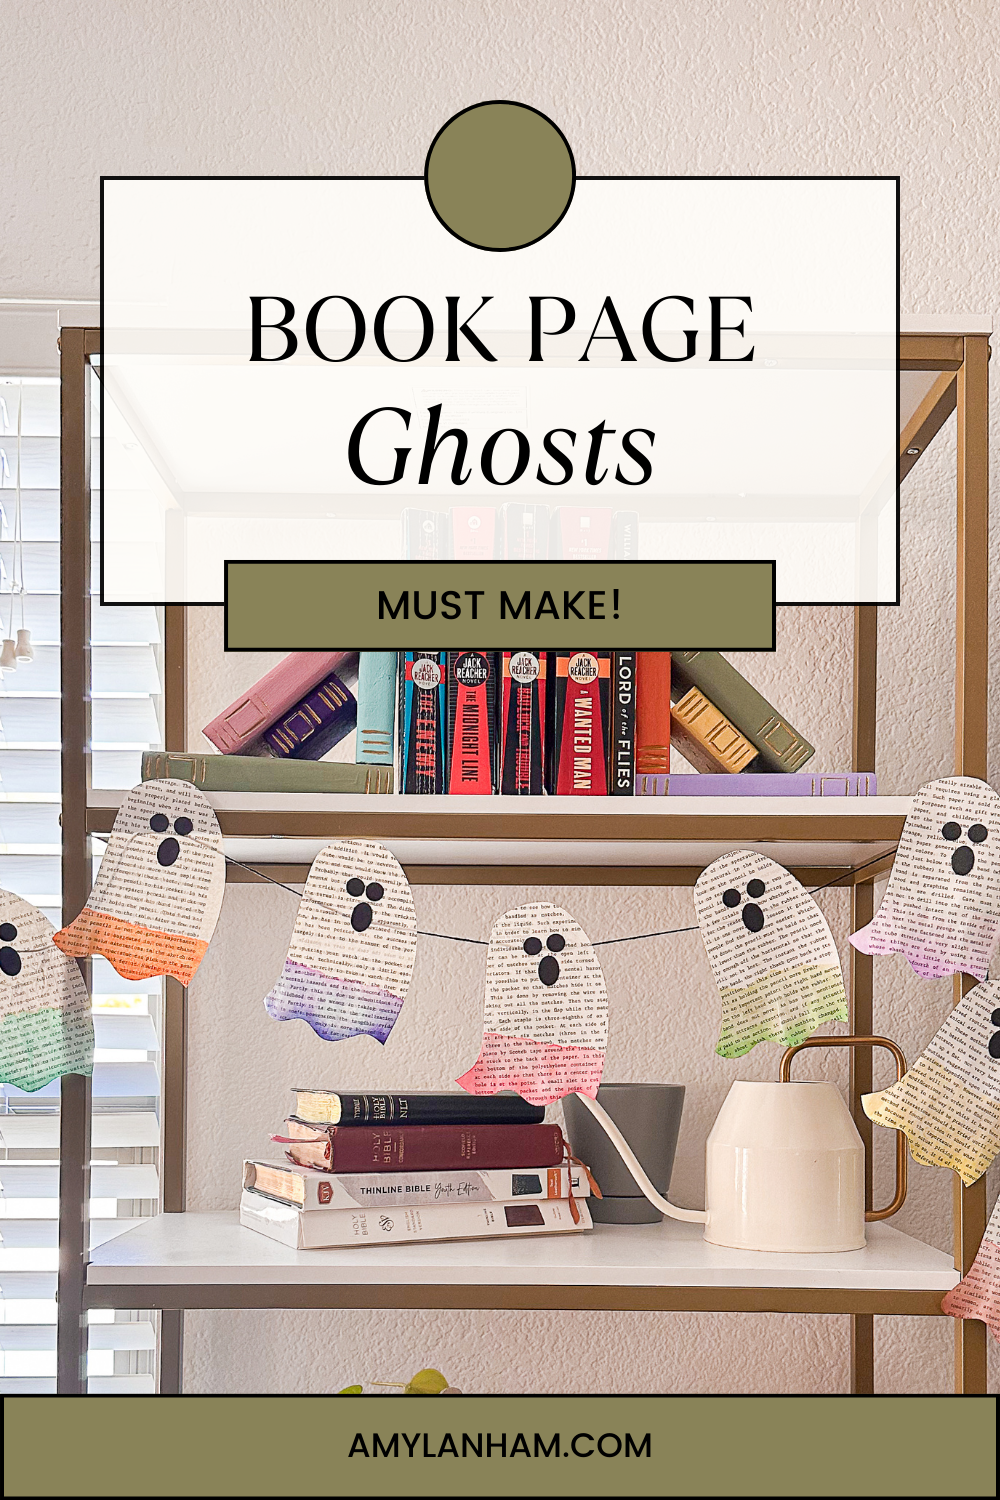 7 book page ghosts with all different colored bottom halves hanging on a bookshelf that has a stack of books and a watering can